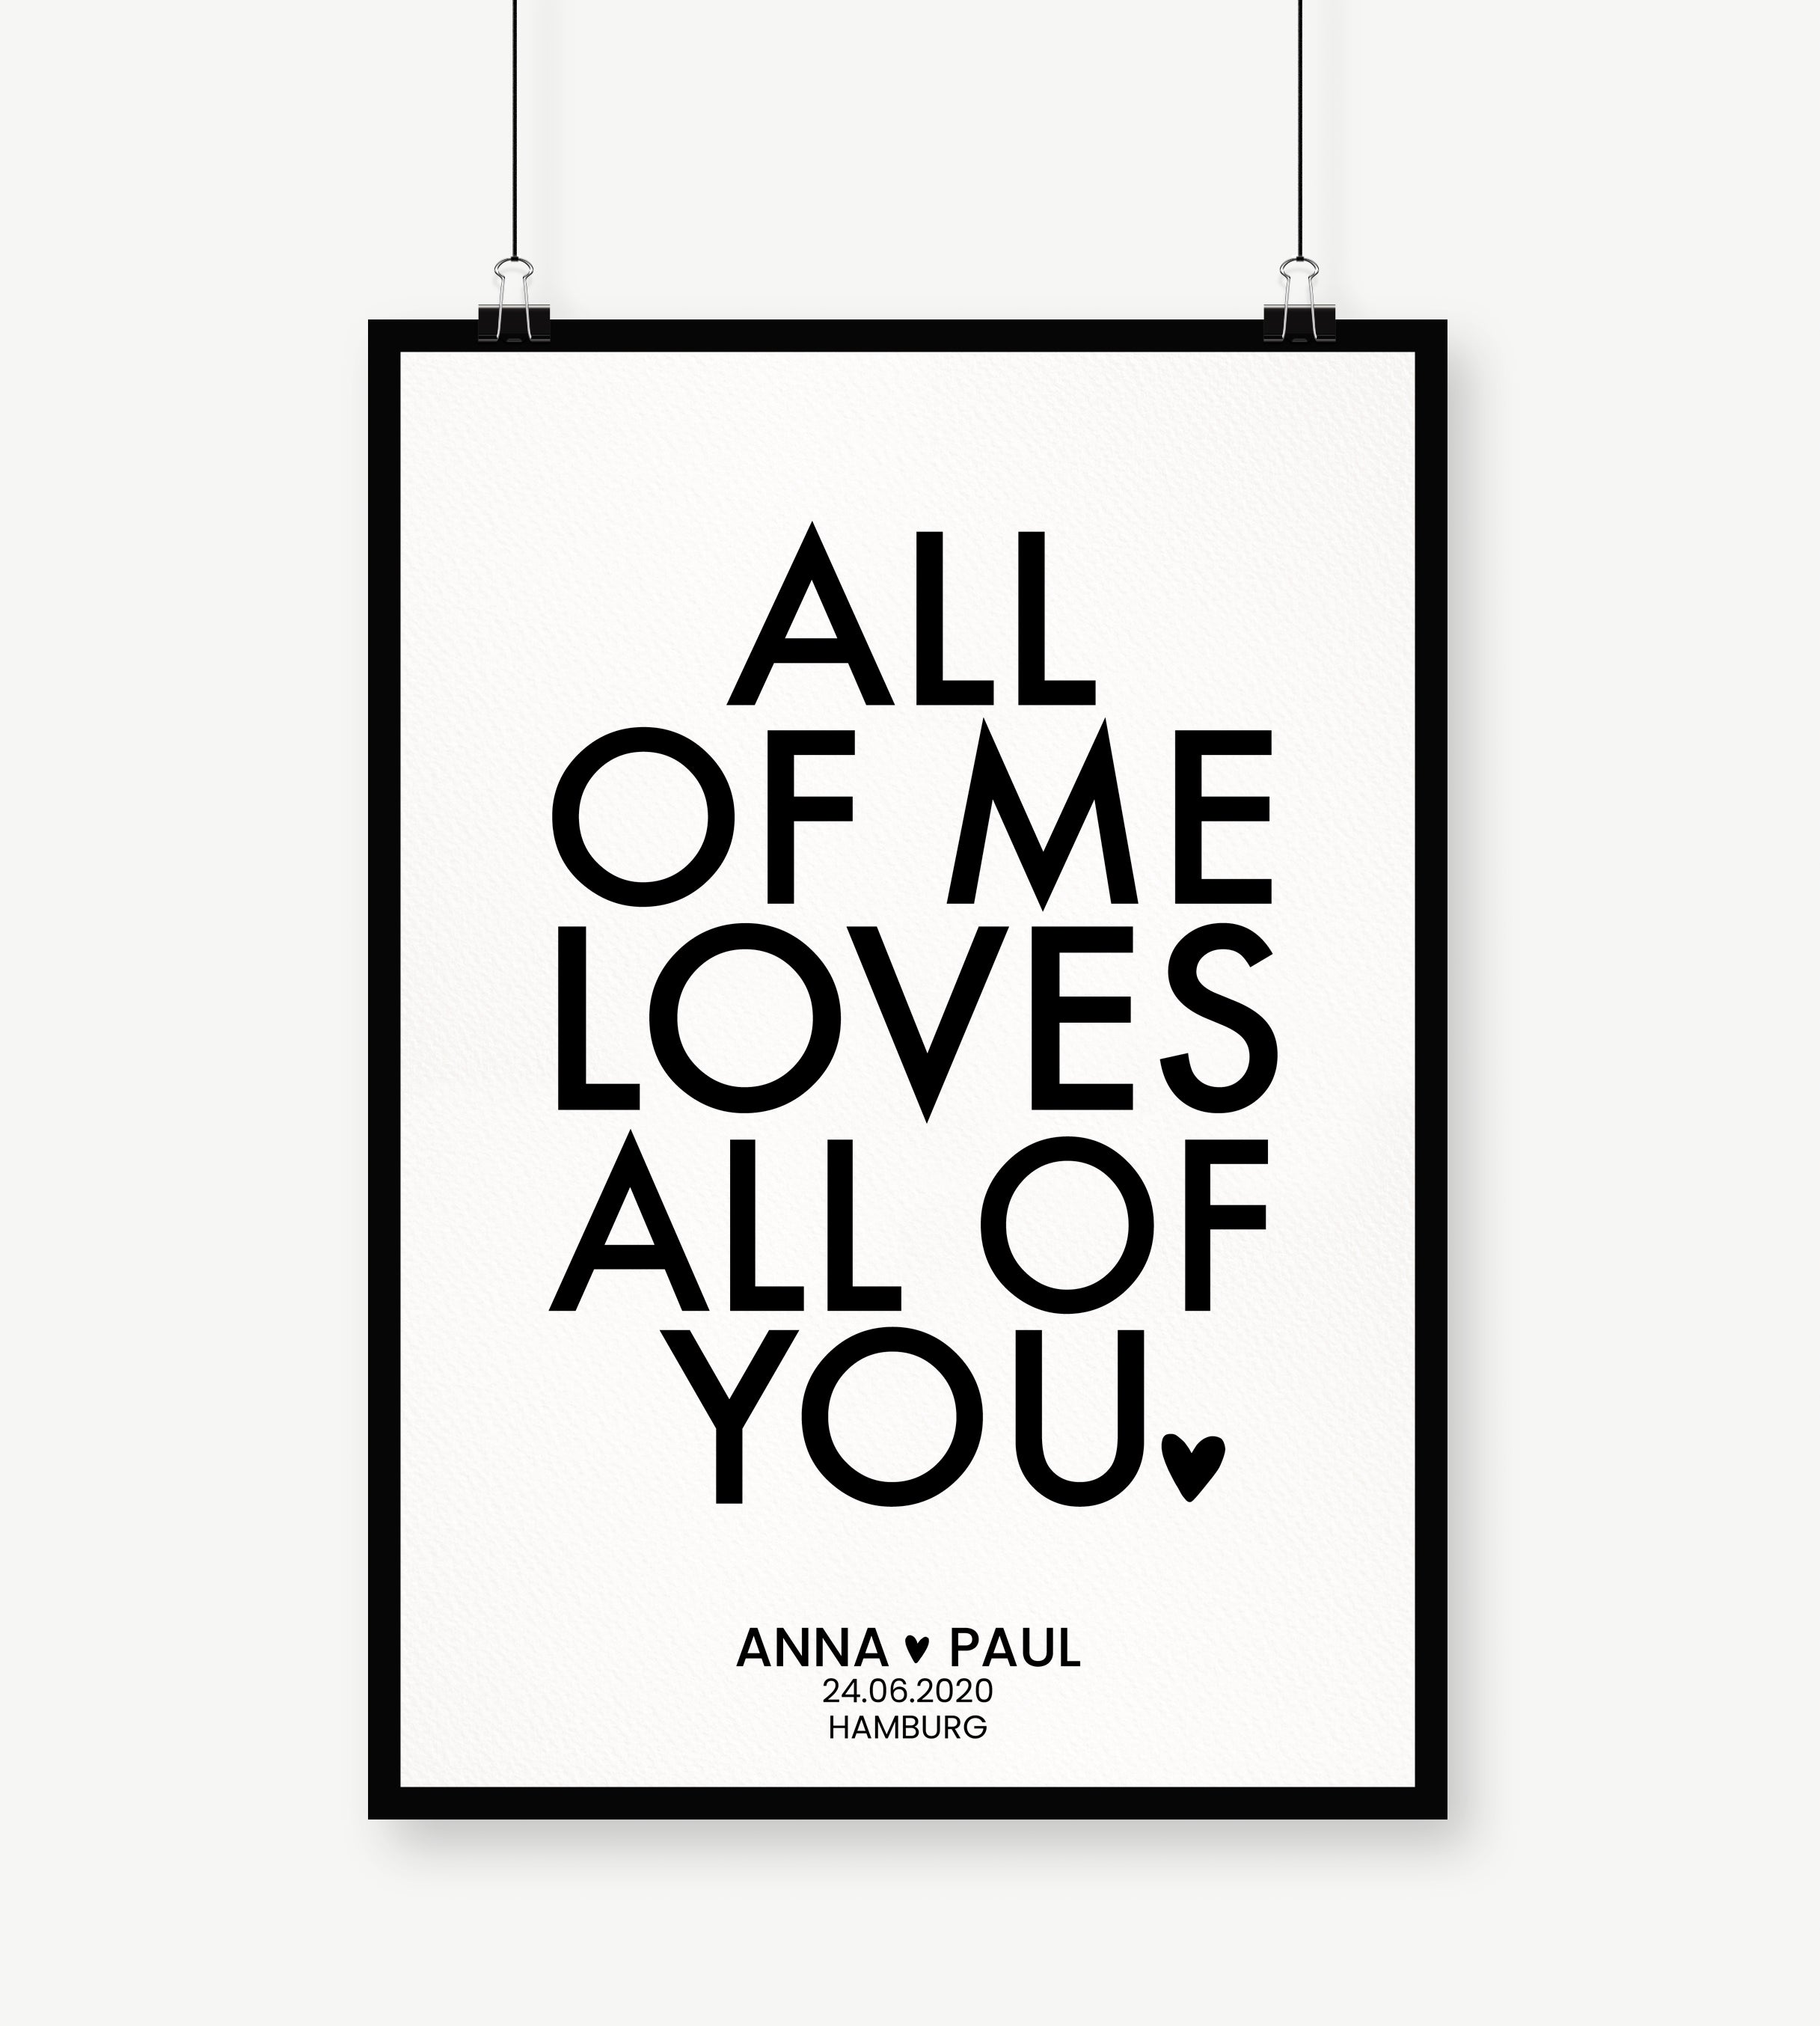 All of me loves all of you - Poster - No. 1